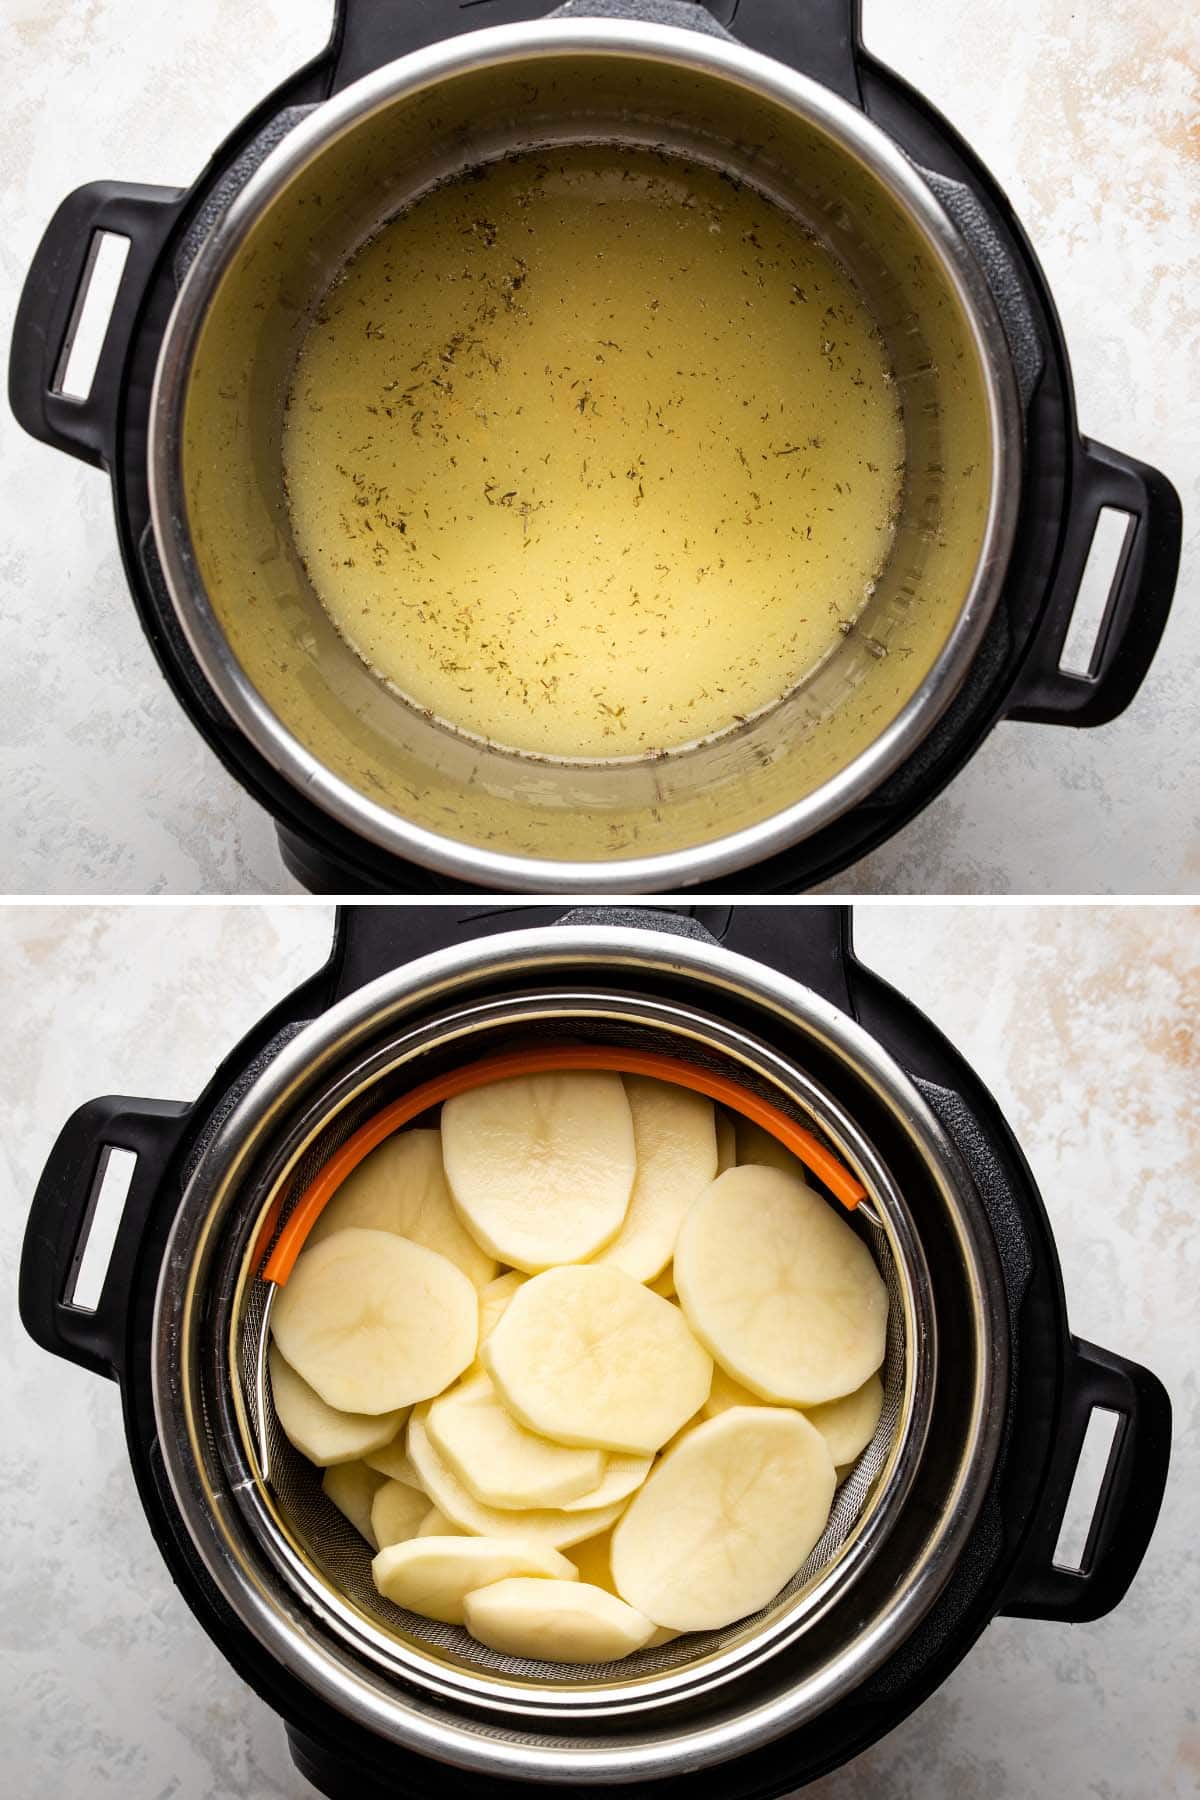 Step one: broth and seasoning in the Instant Pot, then step two: sliced potato rounds in a steamer basket in the Instant Pot.